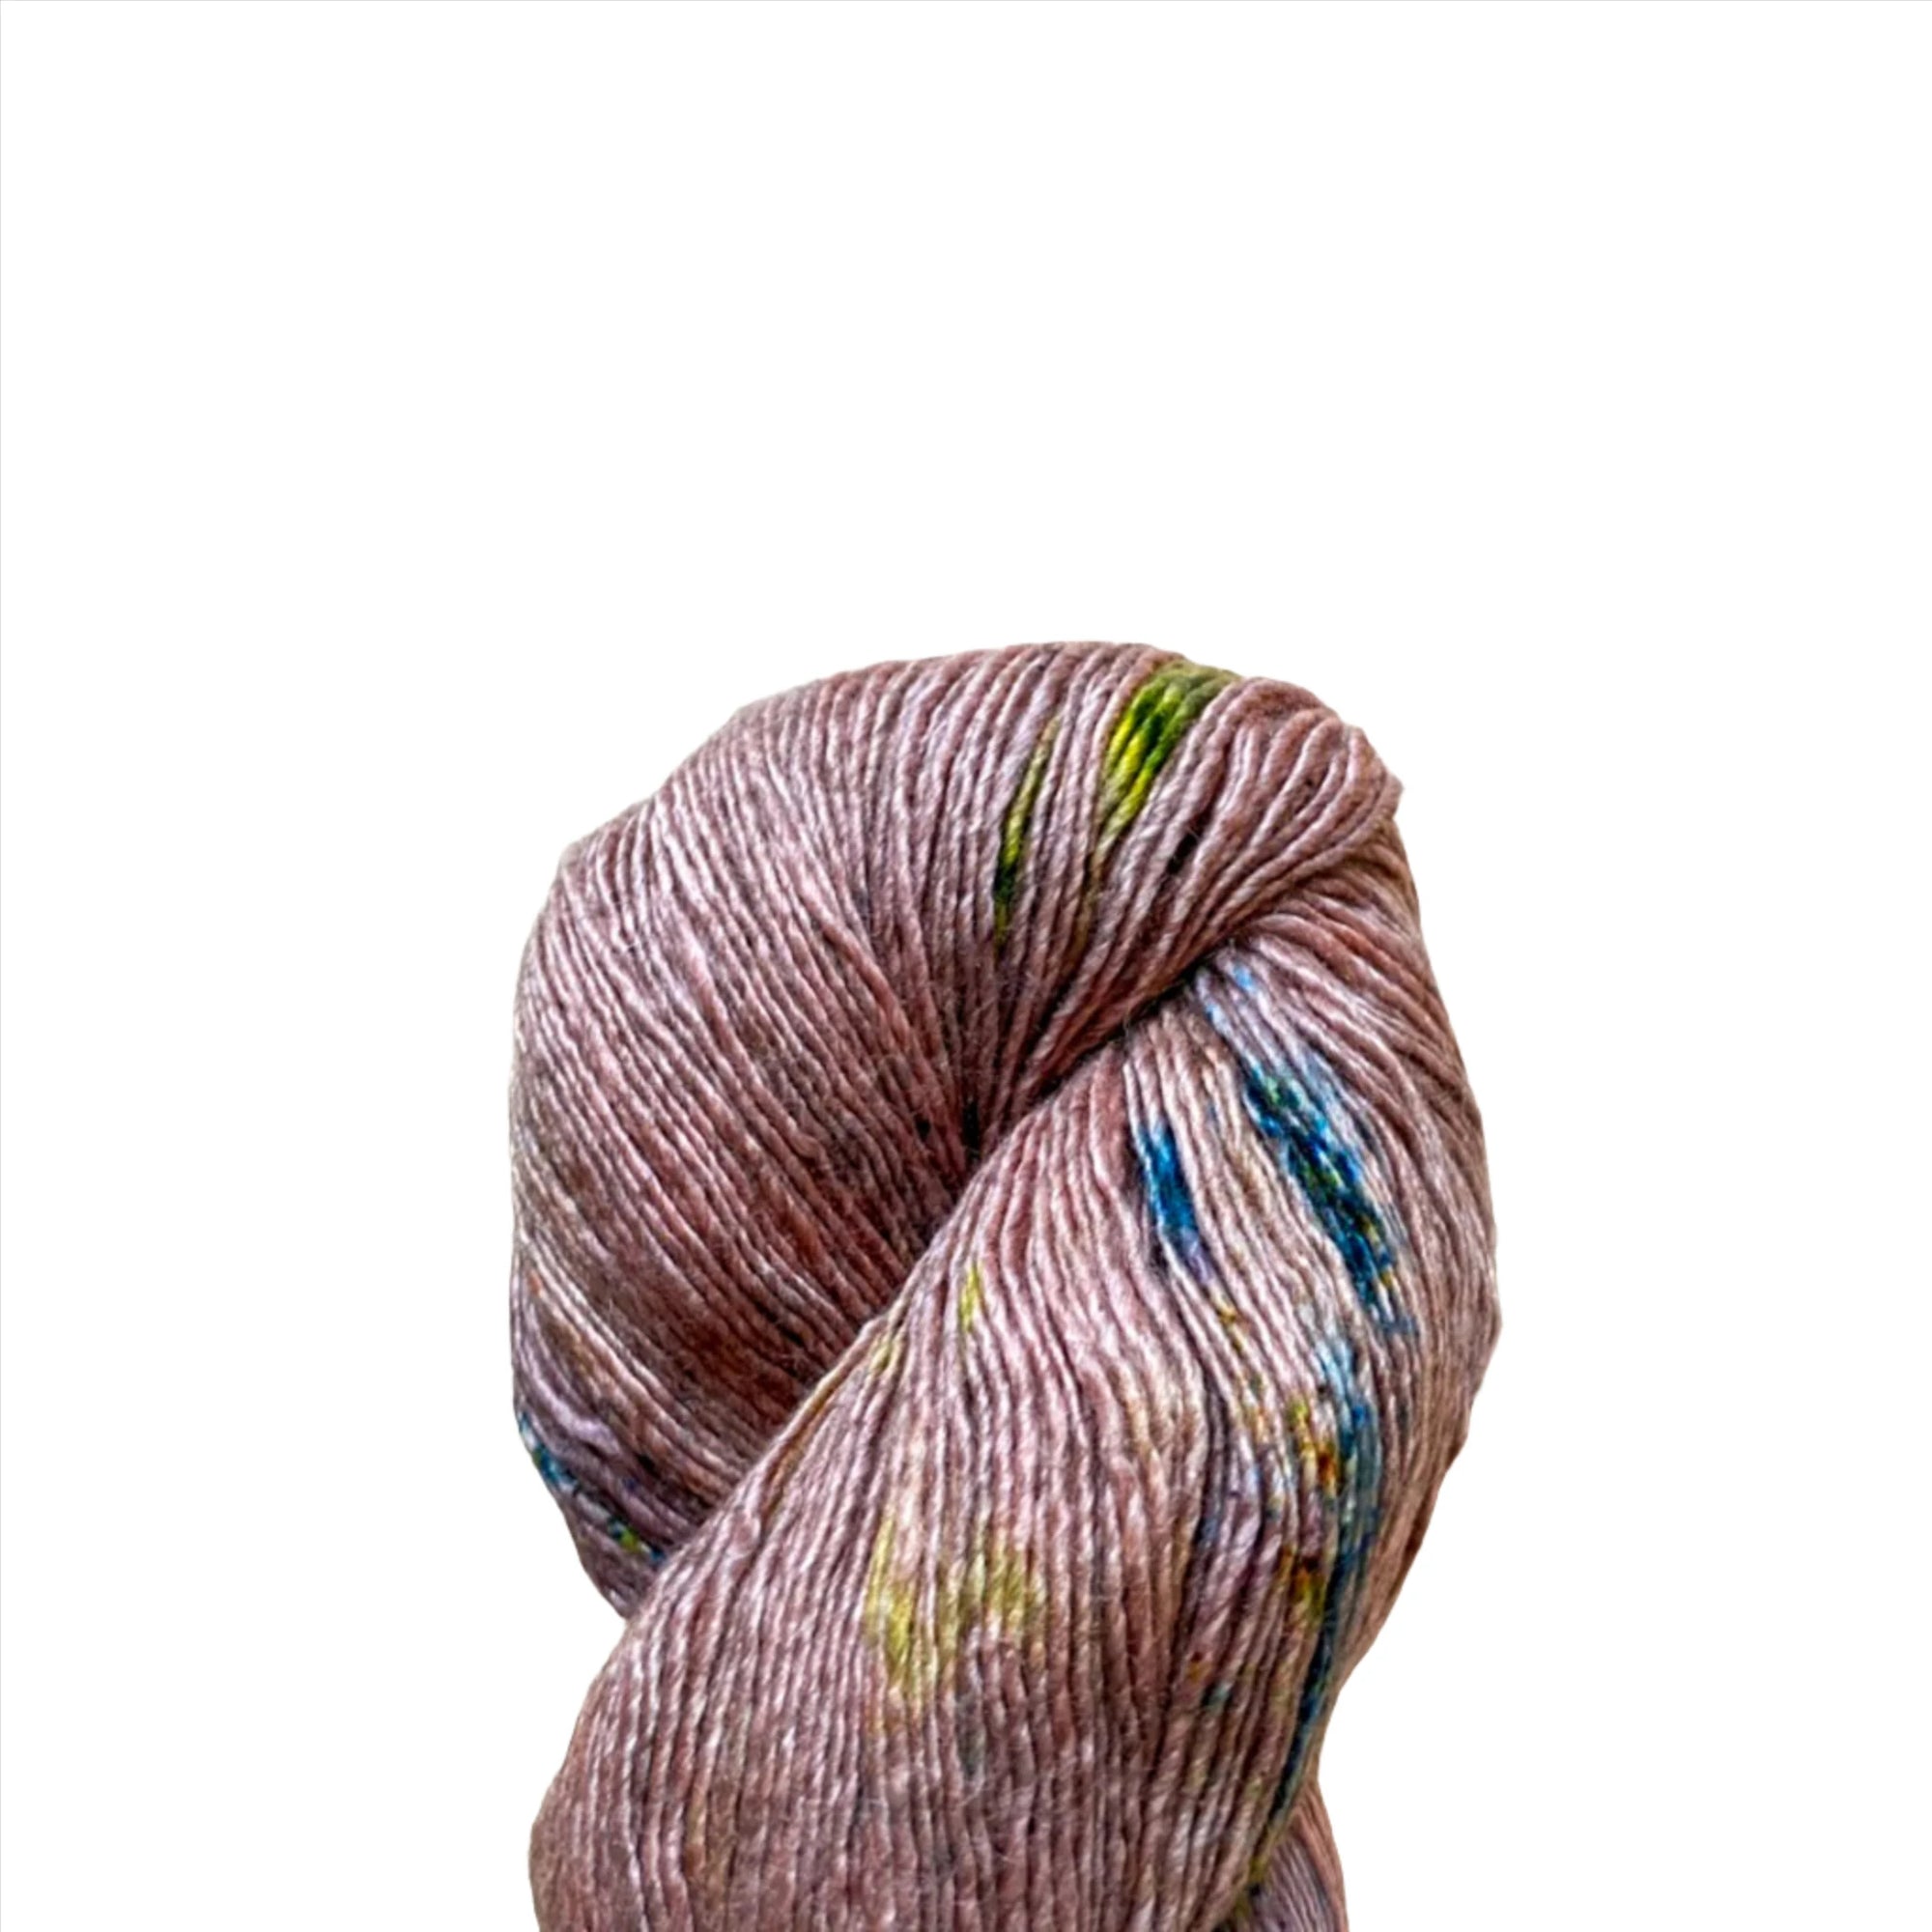 Qing Fibre Yak Single - Qing Fibre - Oyster - The Little Yarn Store